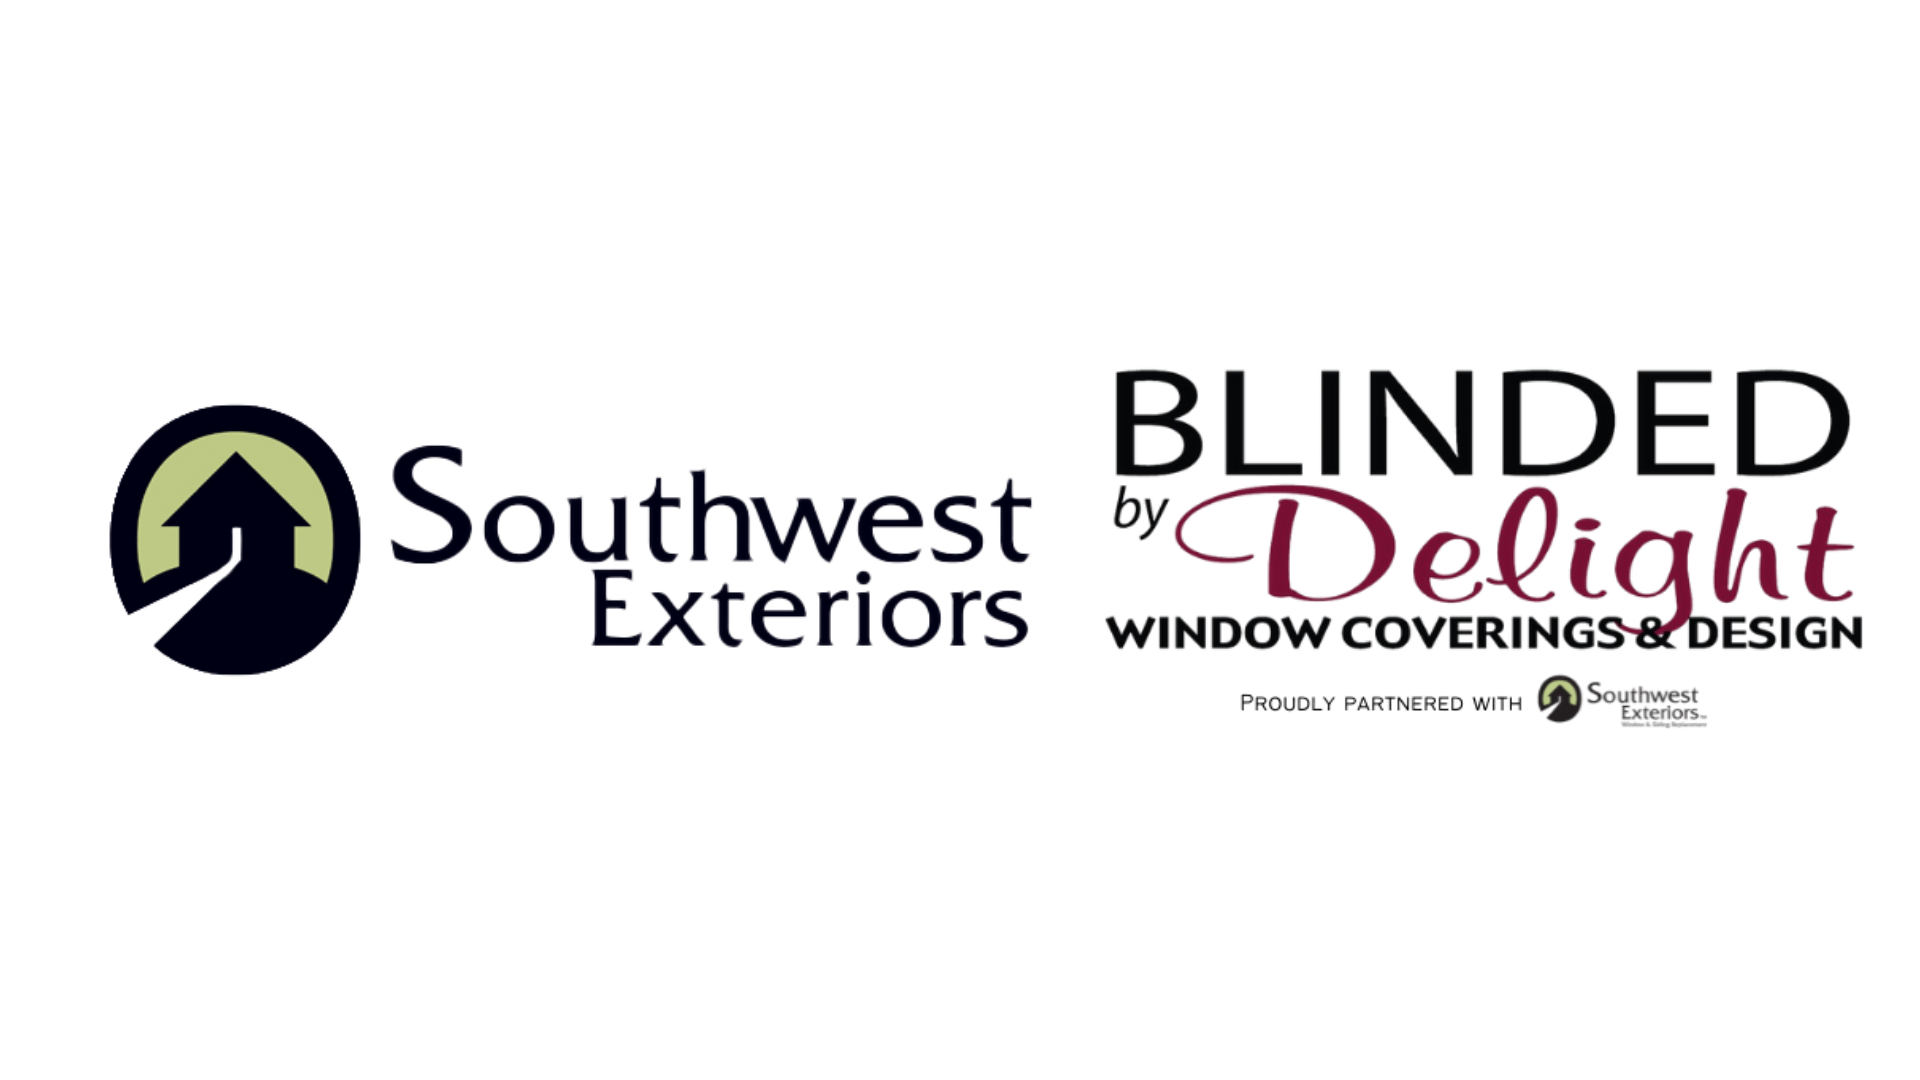 Southwest Exteriors acquires Blinded by Delight Window Coverings & Design